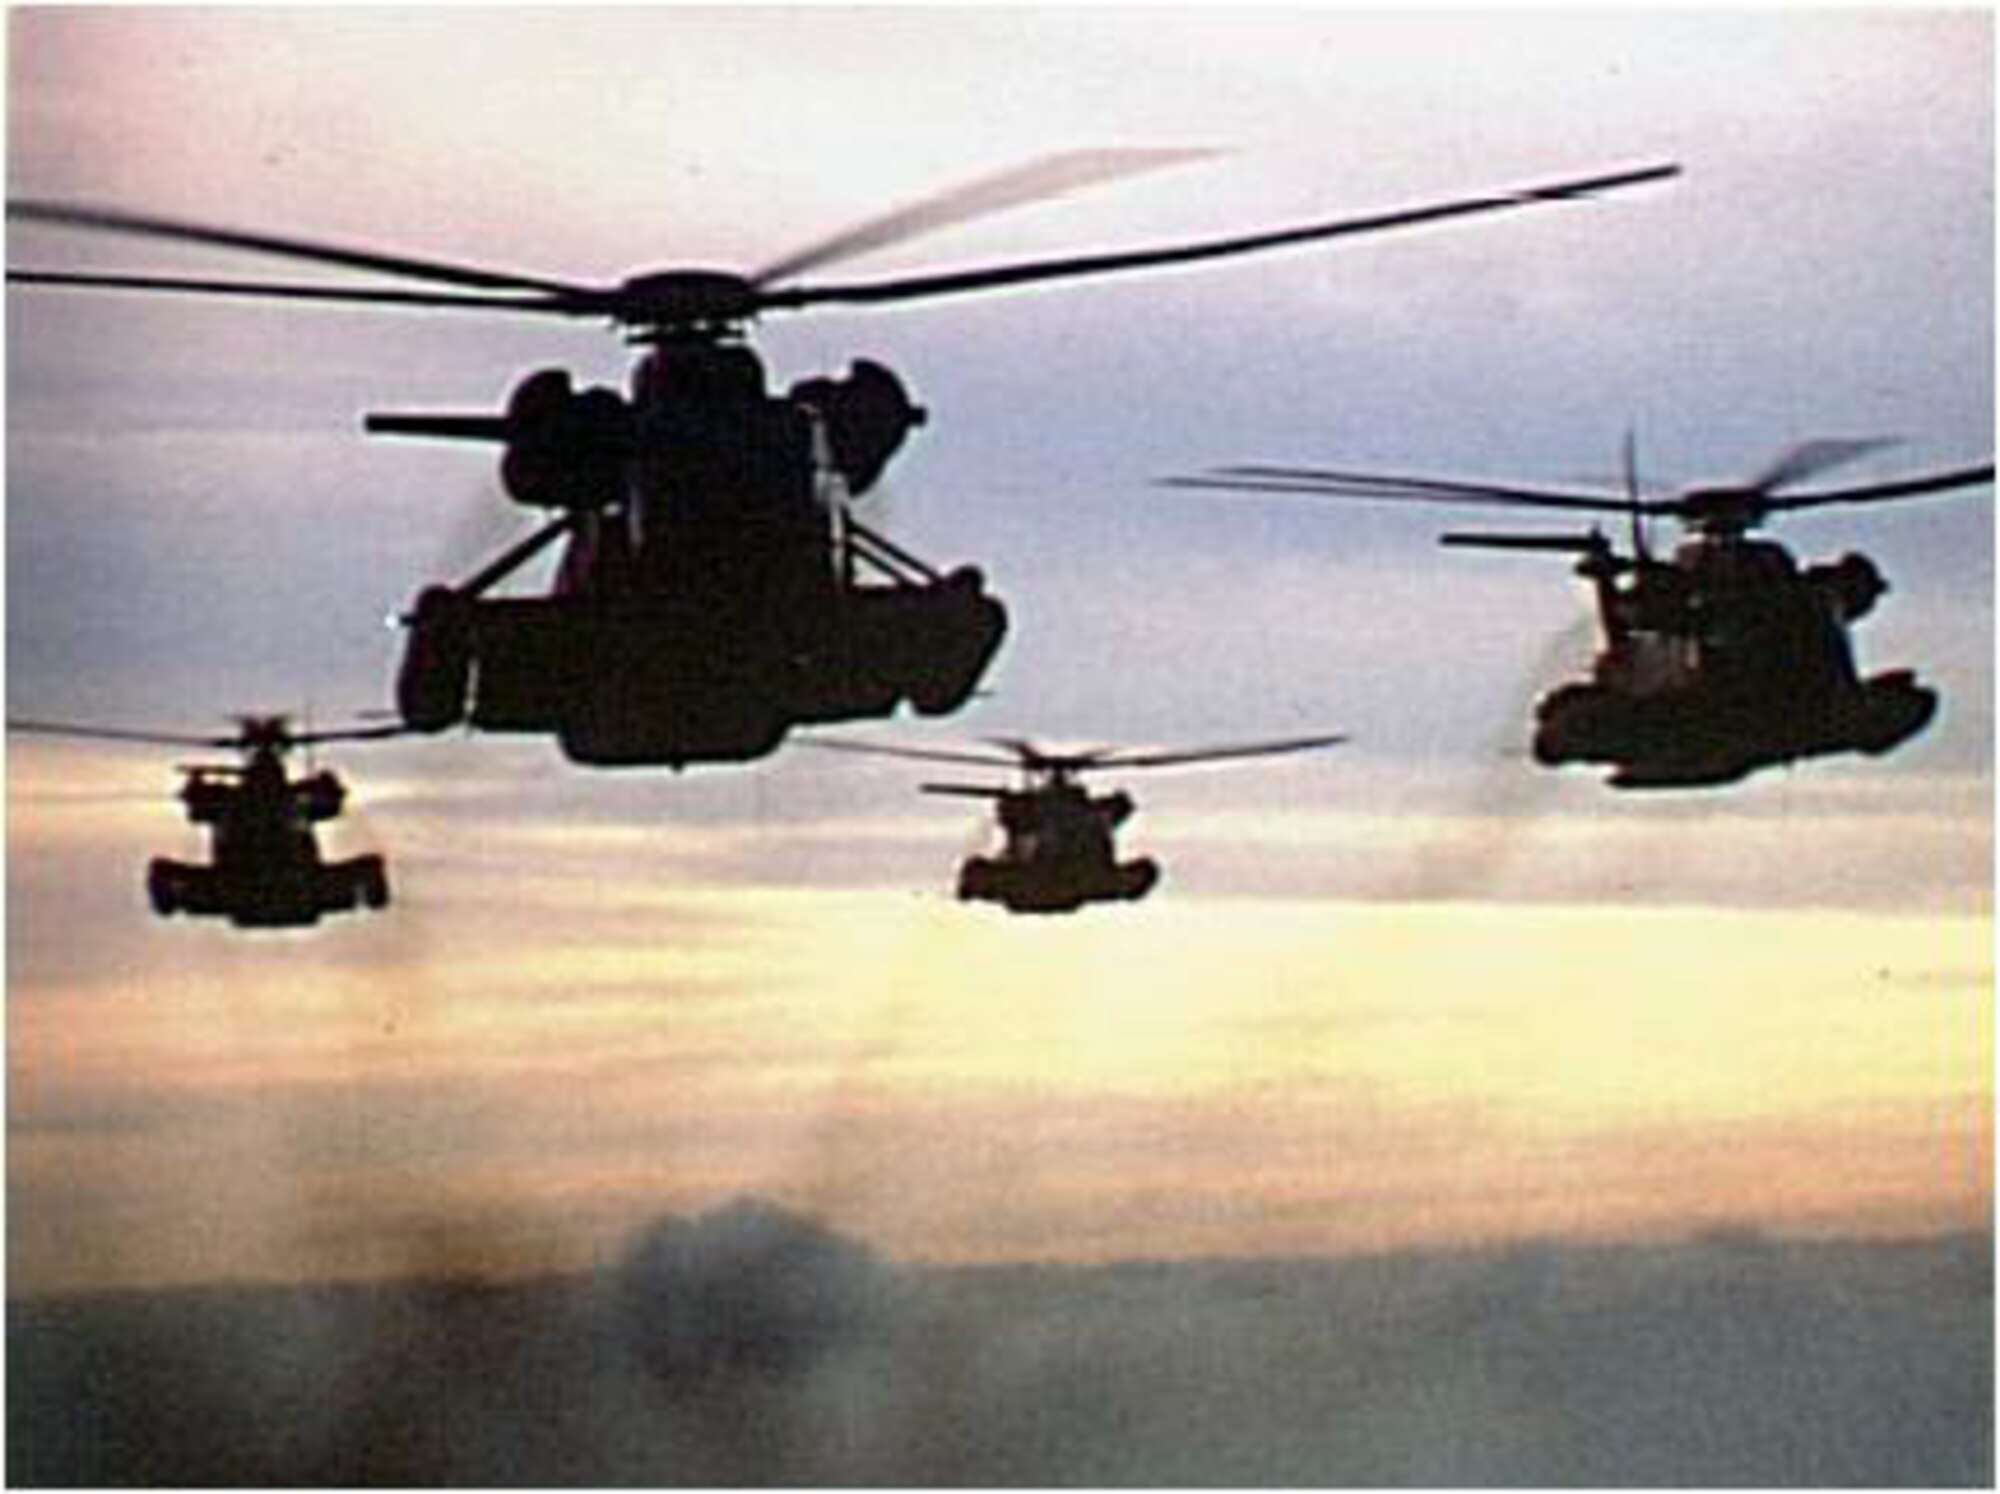 The MH-53 PAVE LOWs knocked out Iraqi early warning sites at the beginning of Operation Desert Storm. (Courtesy Photograph)

